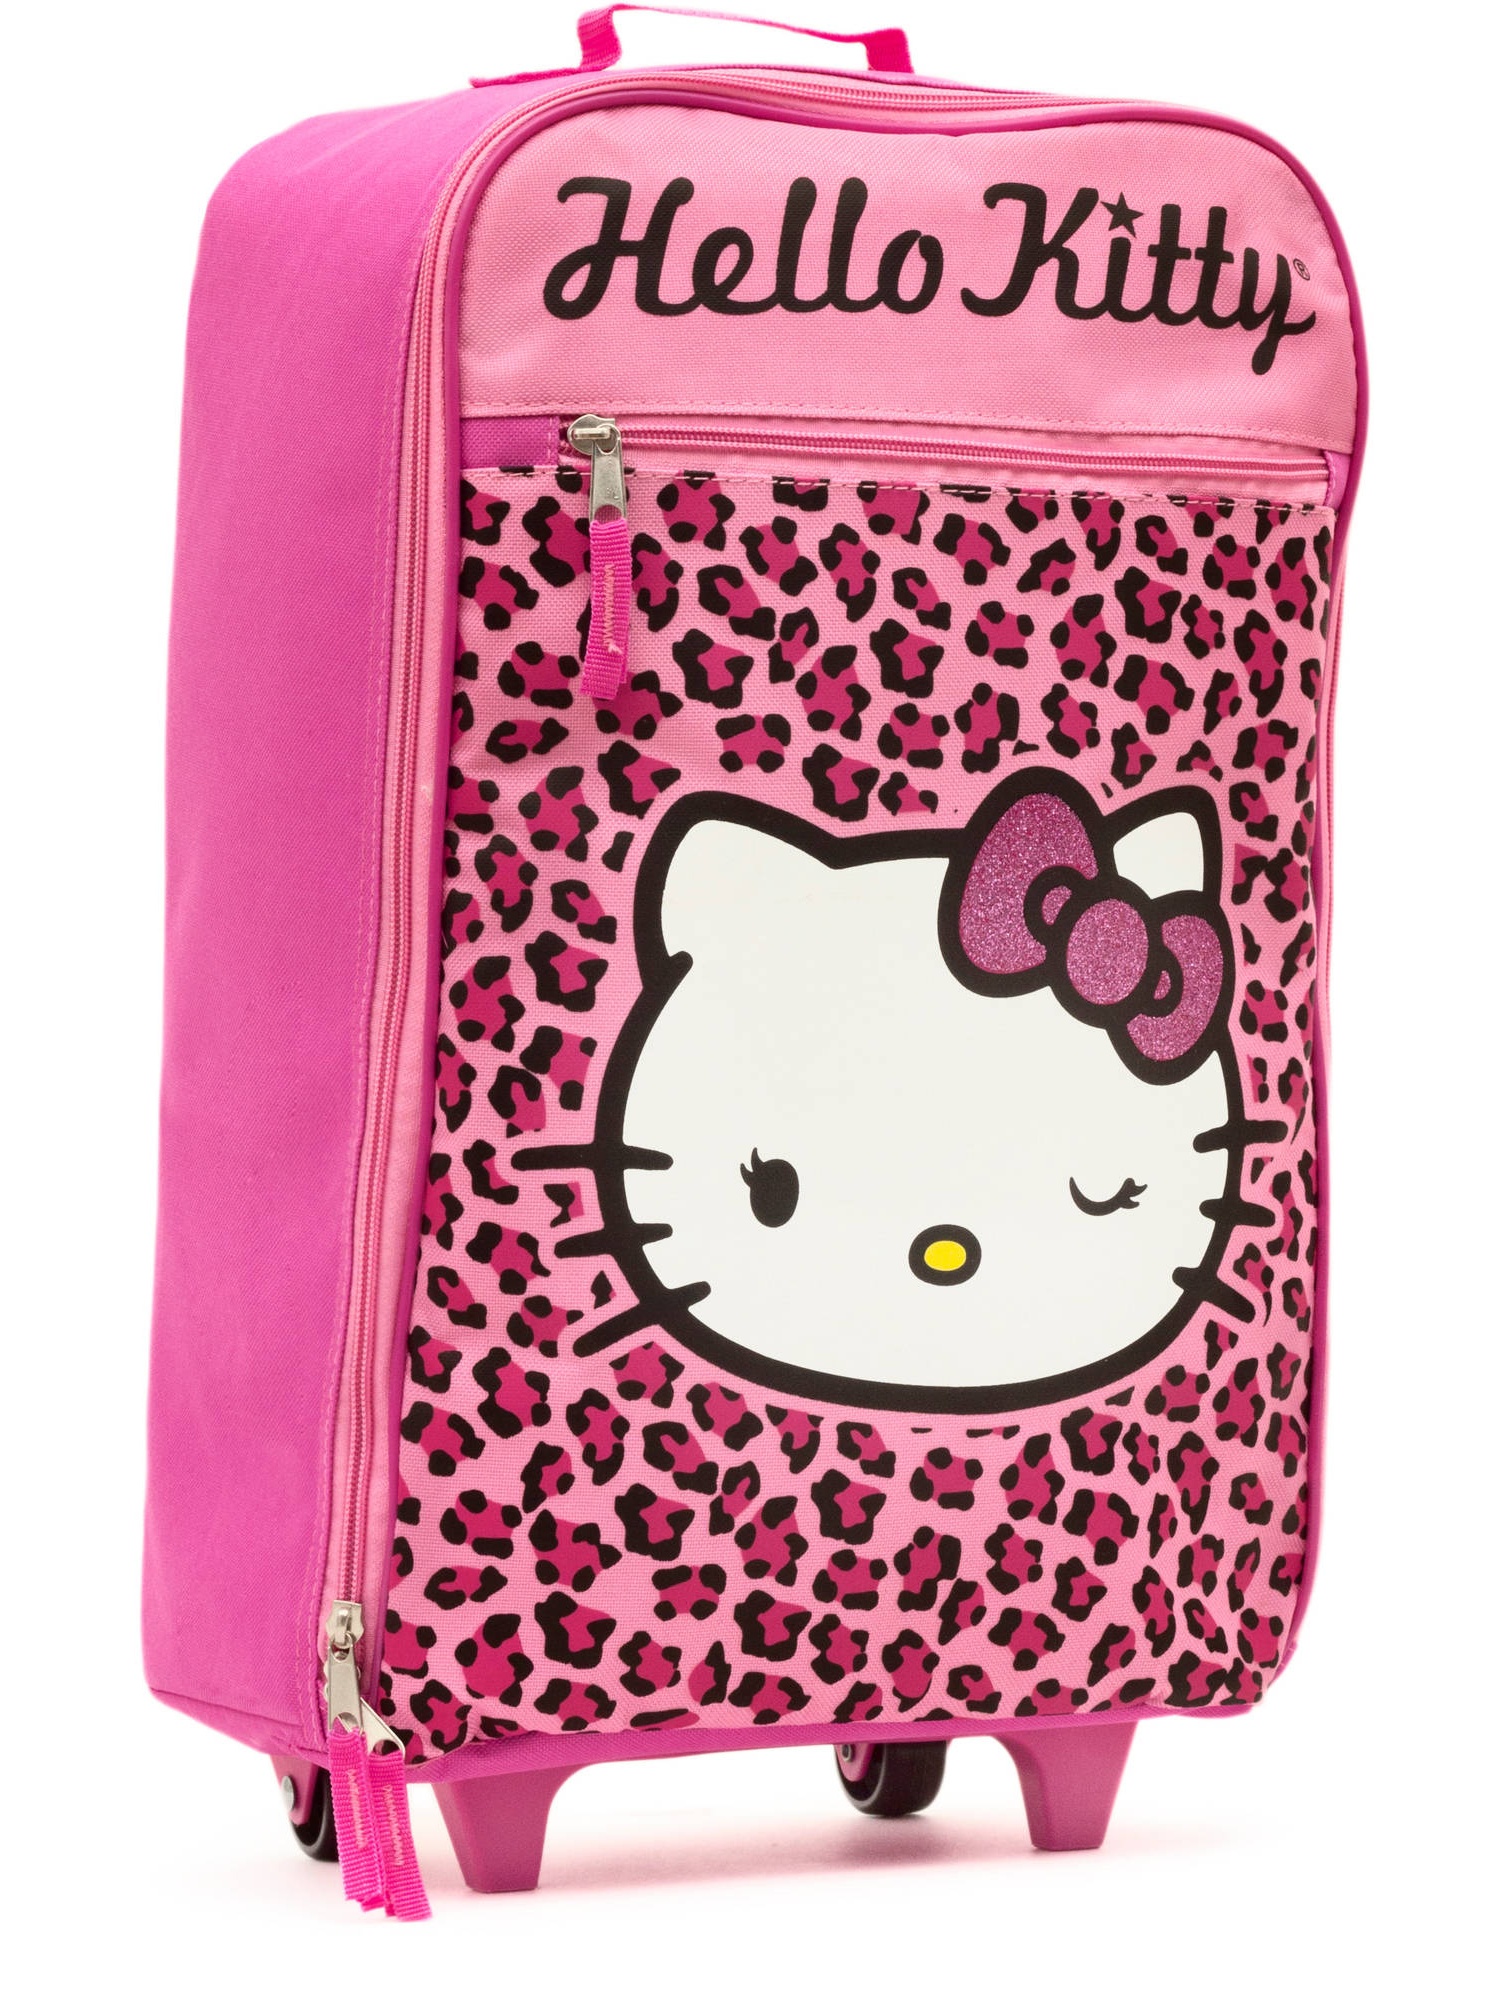 Hello Kitty Pilot Case, Pink - image 1 of 2